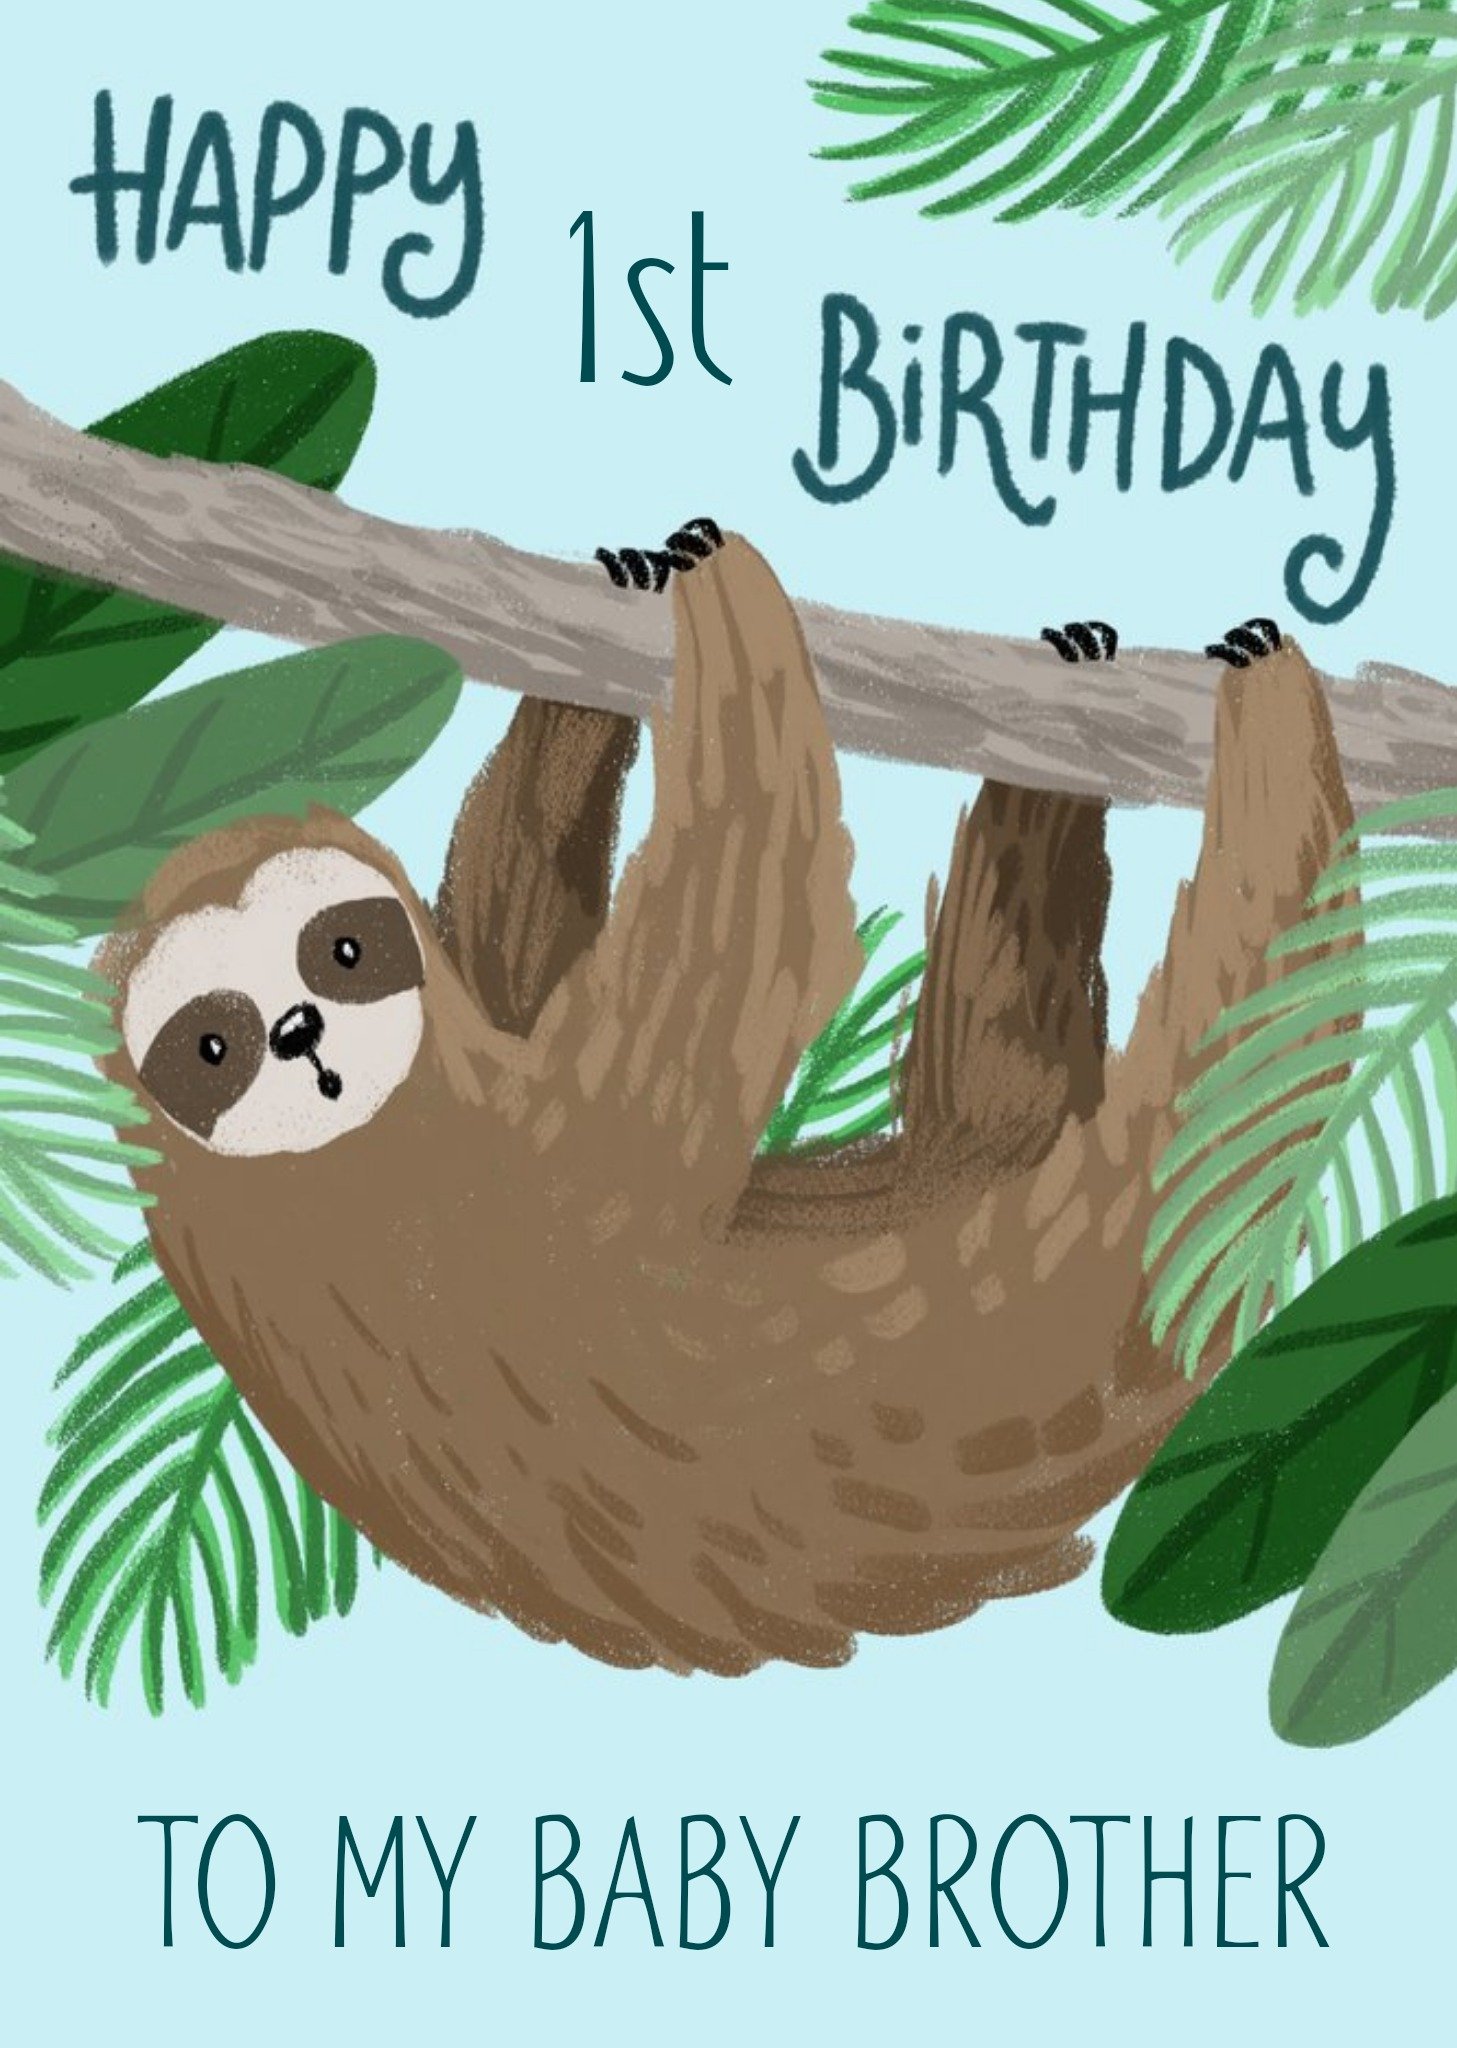 Moonpig Cute Illustrated Sloth 1st Birthday Card For Your Baby Brother By Okey Dokey Design Ecard